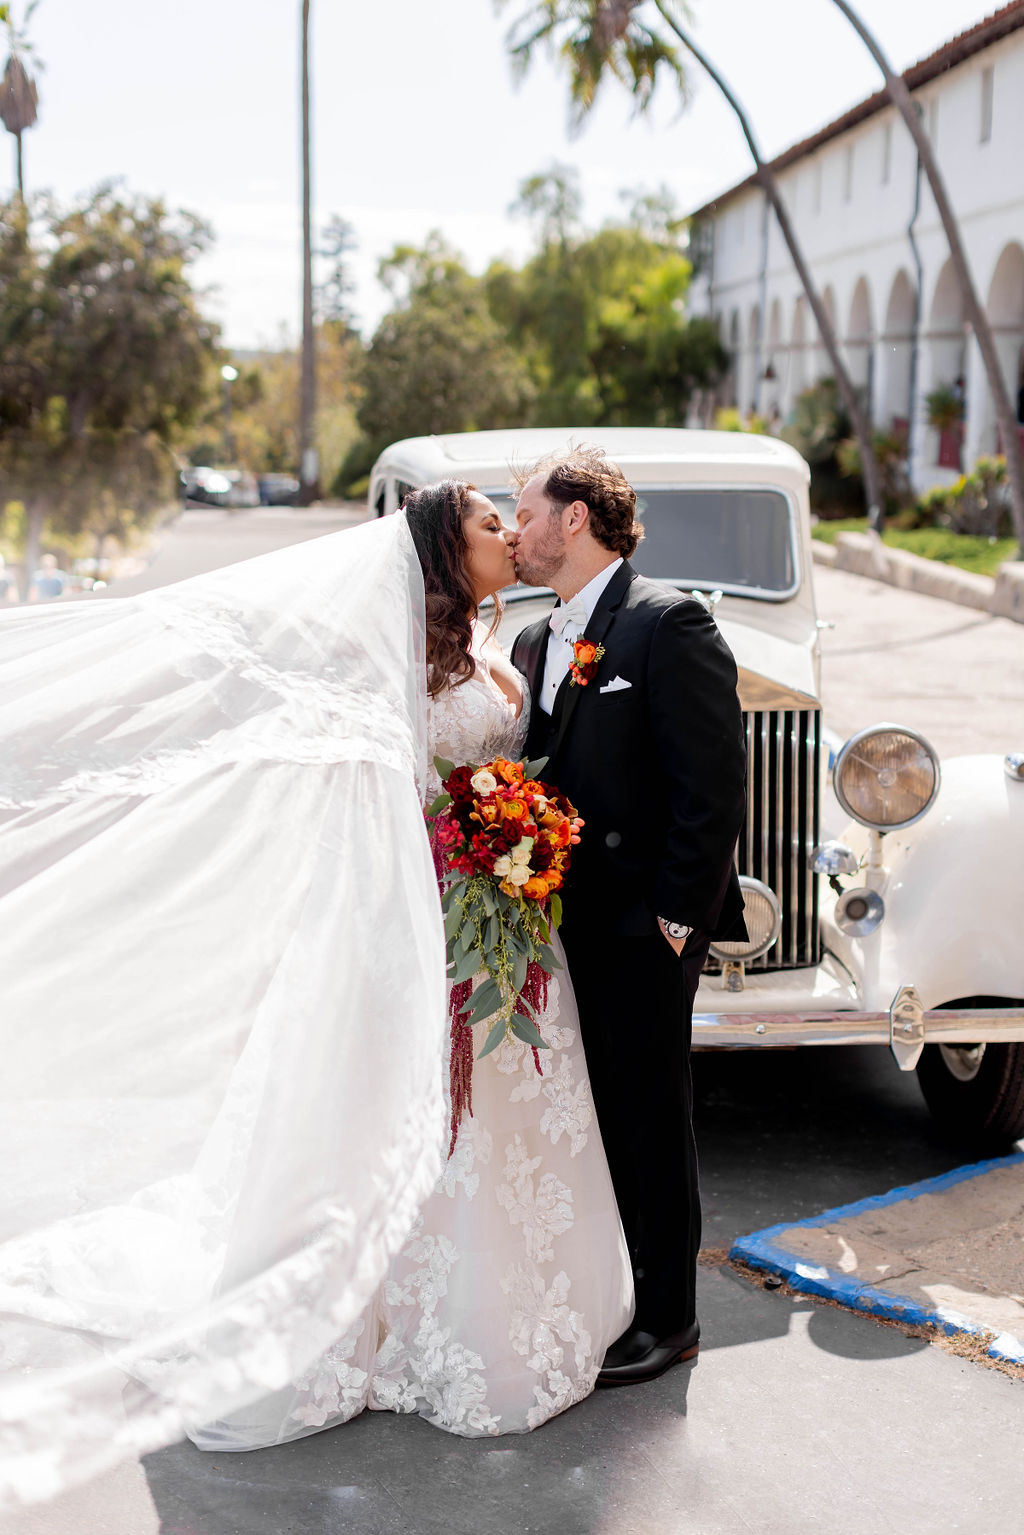 Bride and Groom kissing in front of the Rolls Royce at Mission Santa Barbara wedding | Photo by Sarah Block Photography